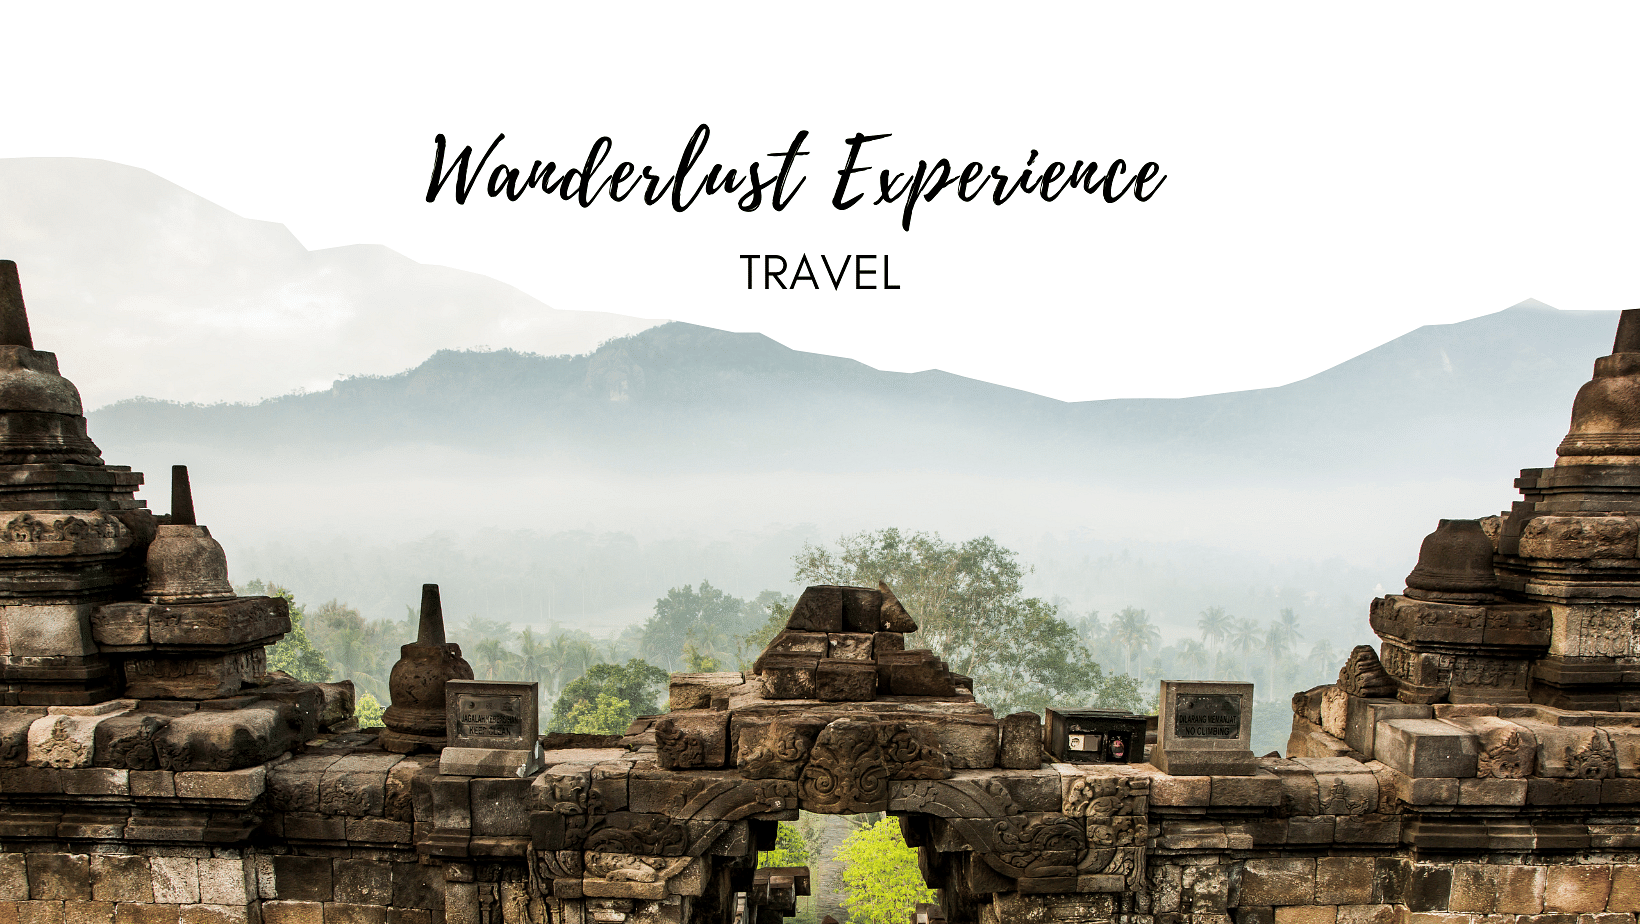 Wanderlust Experience Travel culture